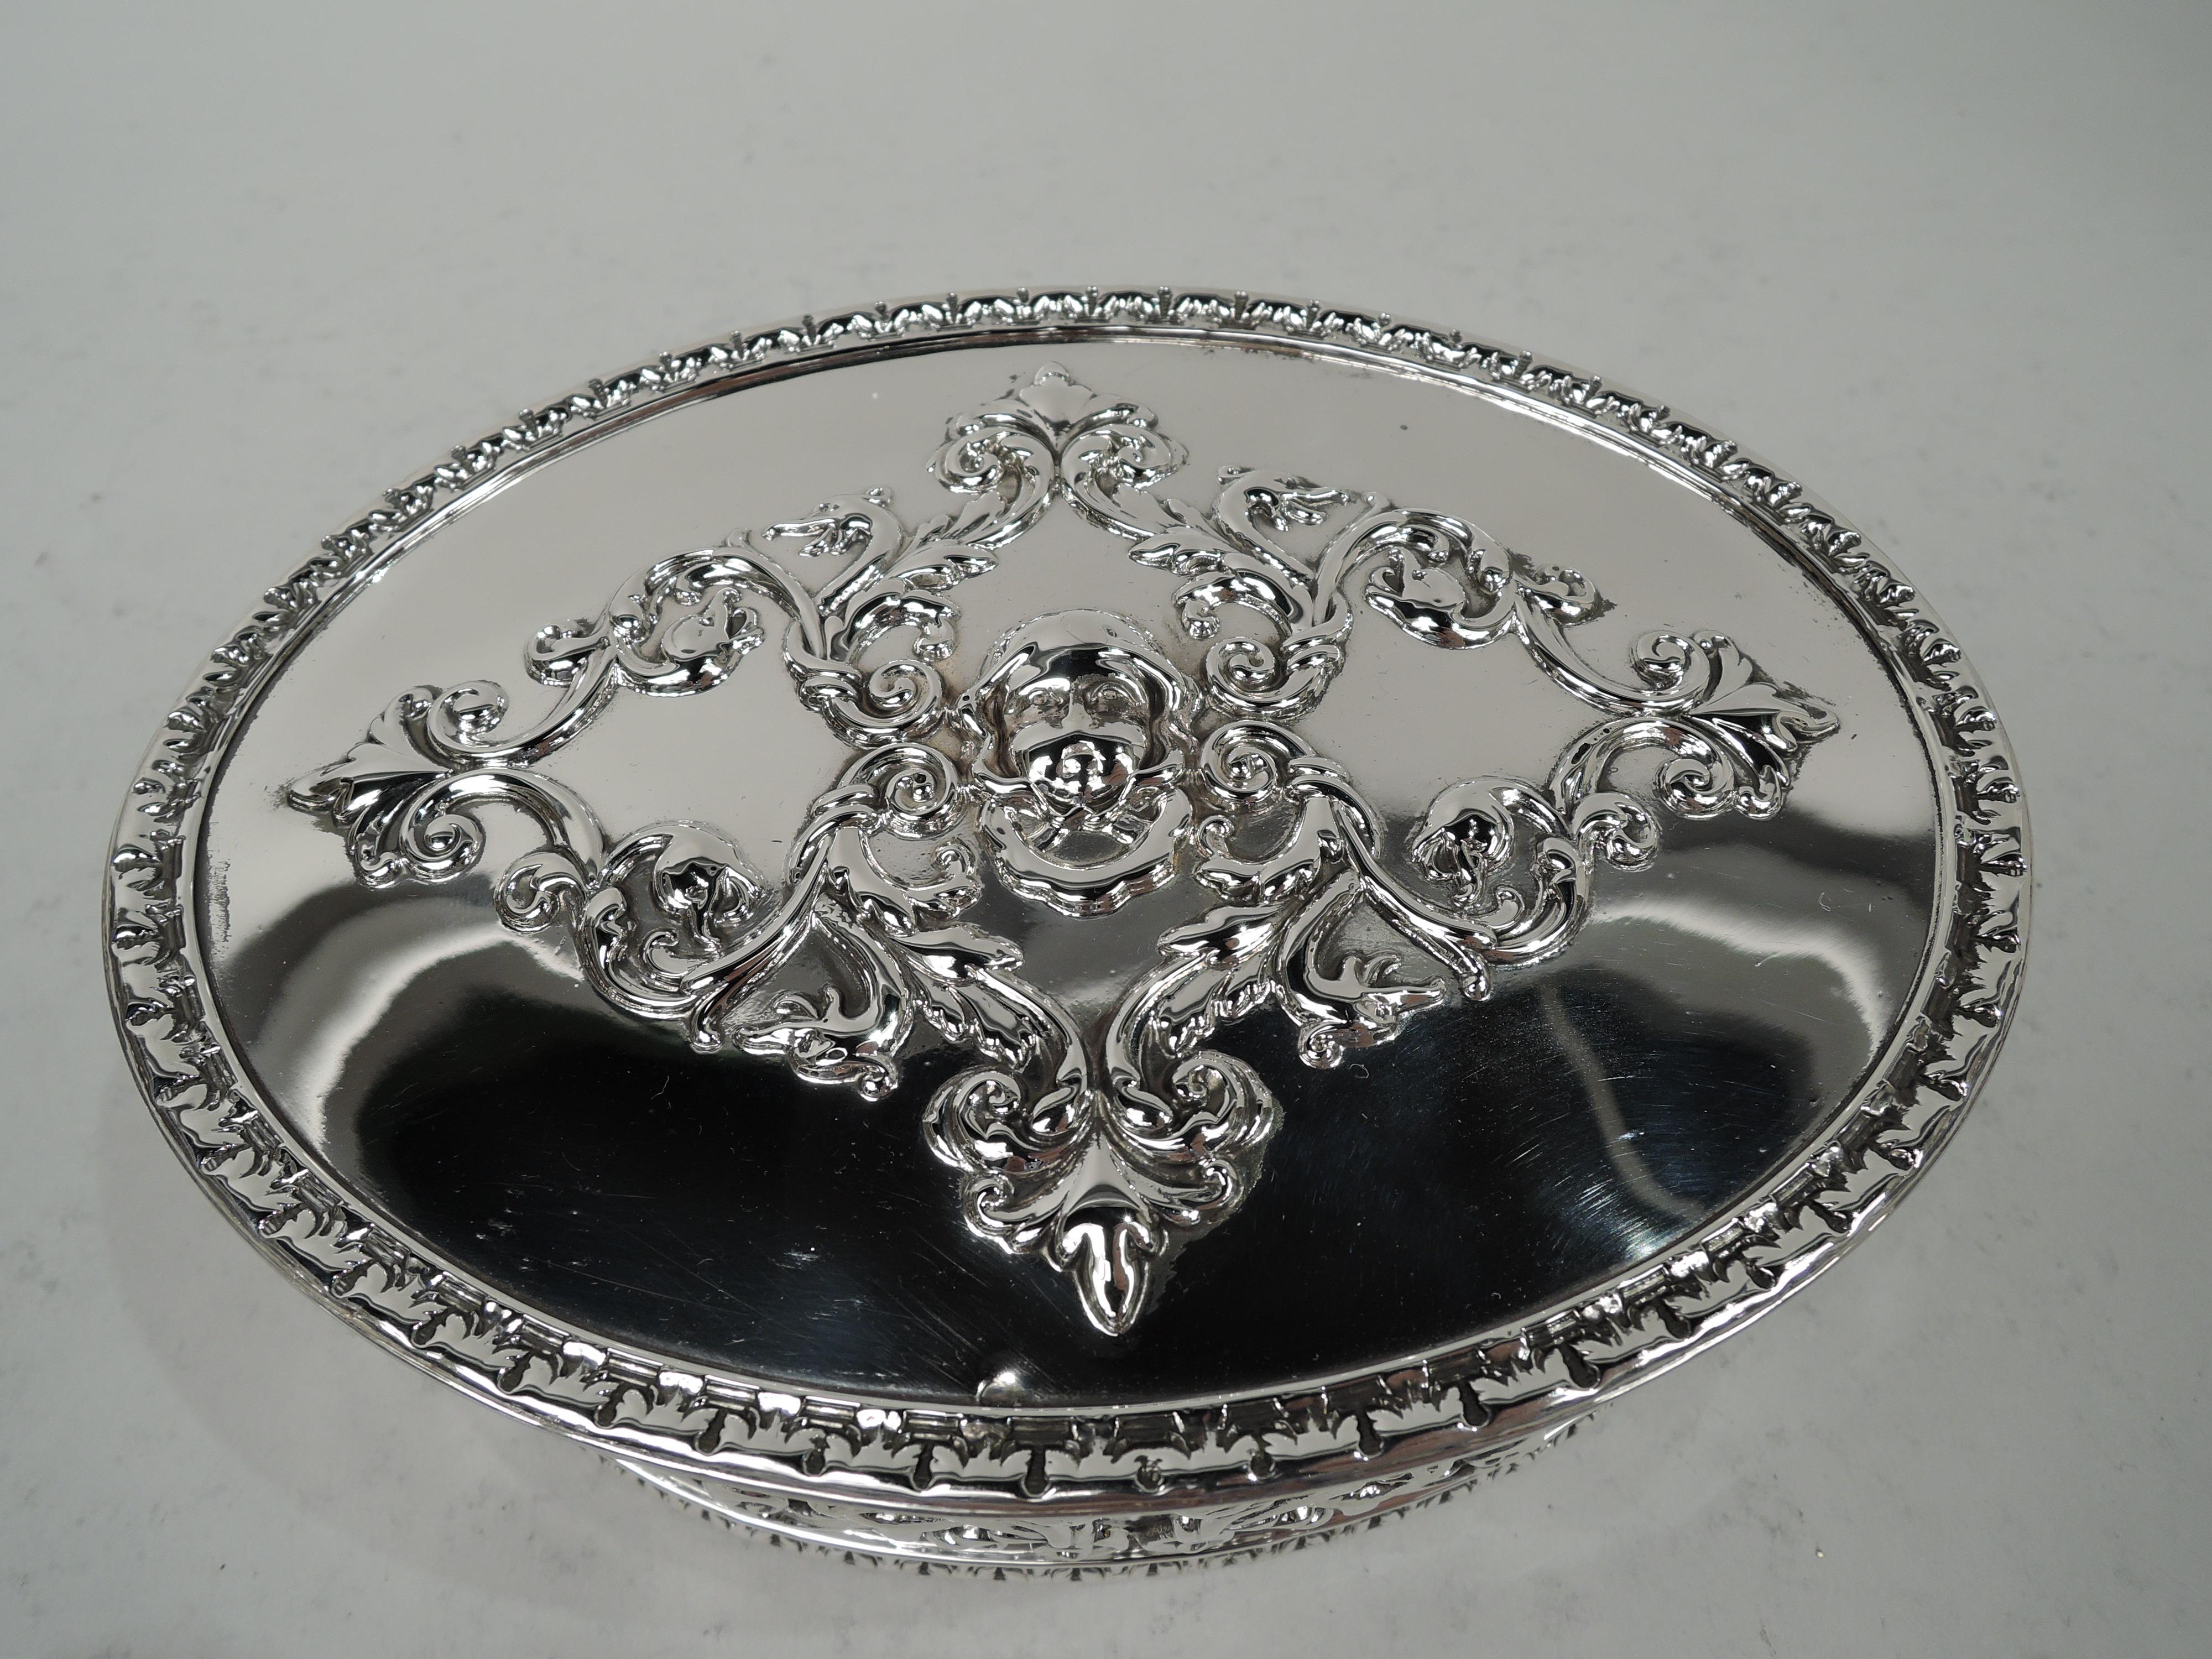 Edwardian Classical sterling silver trinket box. Made by Howard & Co. in New York in 1901. Oval with straight sides and flat hinged cover. Leafing scrollwork applied to sides and cover top, which also has centrally mounted cherub’s head. Reeded rims